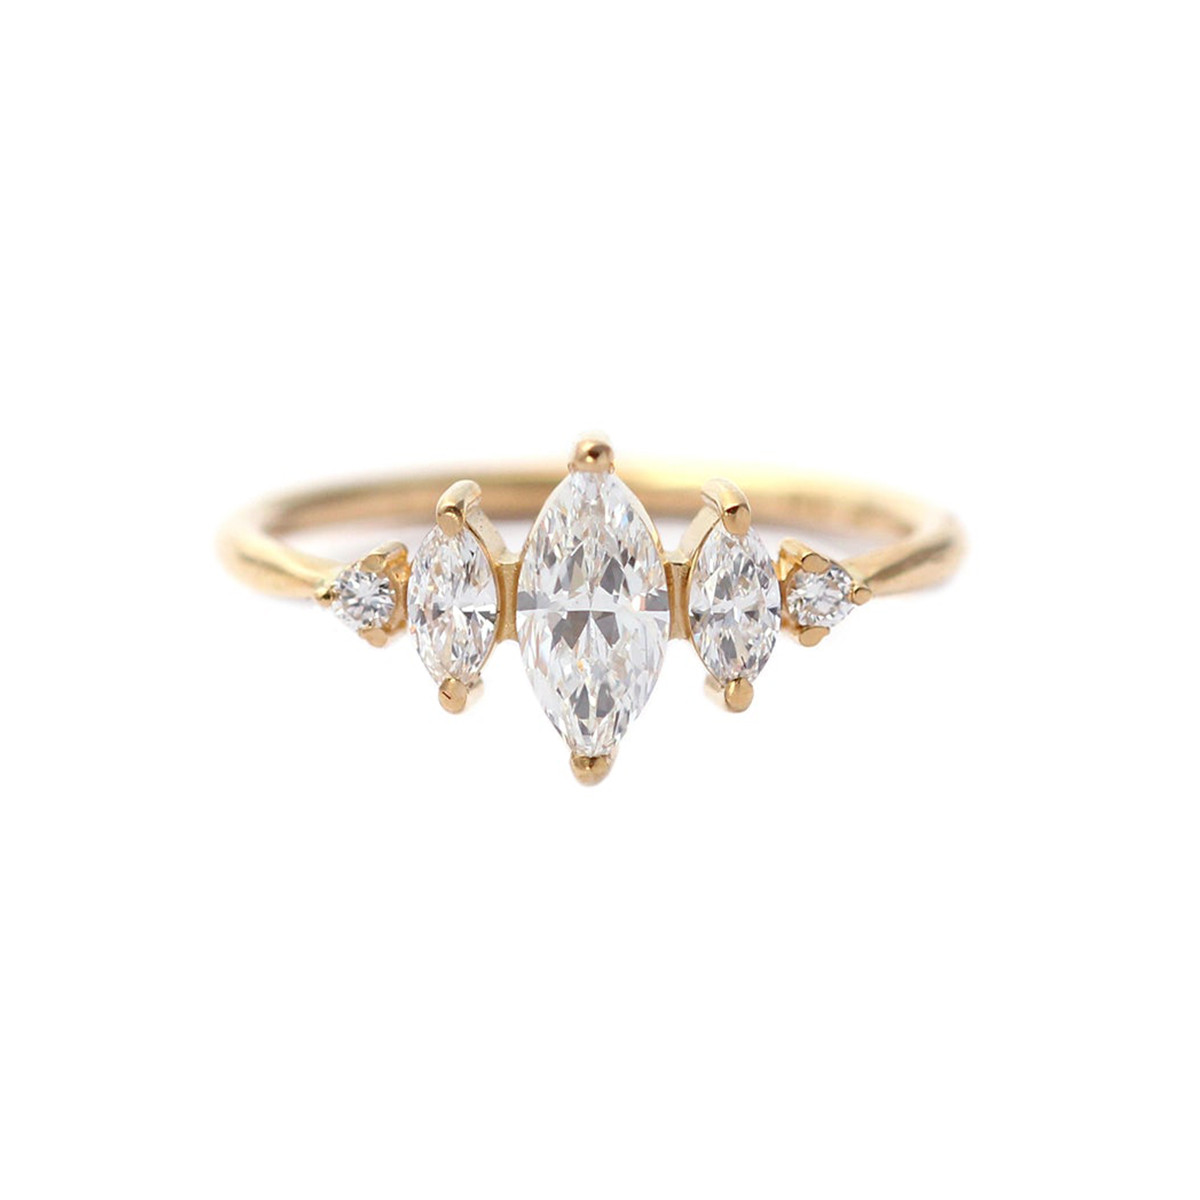 Art Deco Marquise Diamond Engagement Ring in 18ct Yellow Gold by Artemer available at tomfoolery london